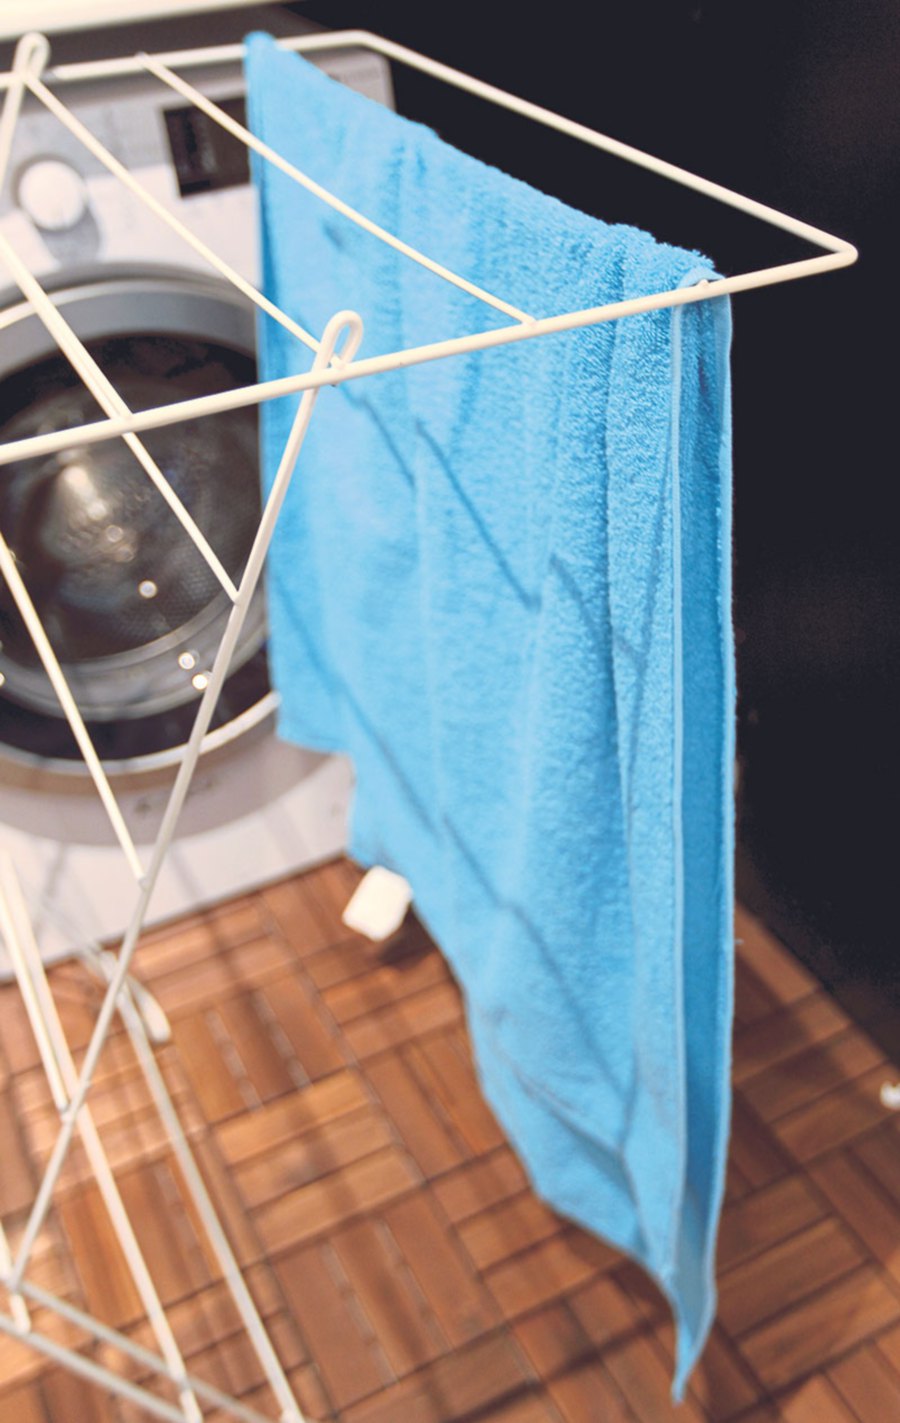 Hang your clothes to dry instead of using a dryer to save energy and electricity,